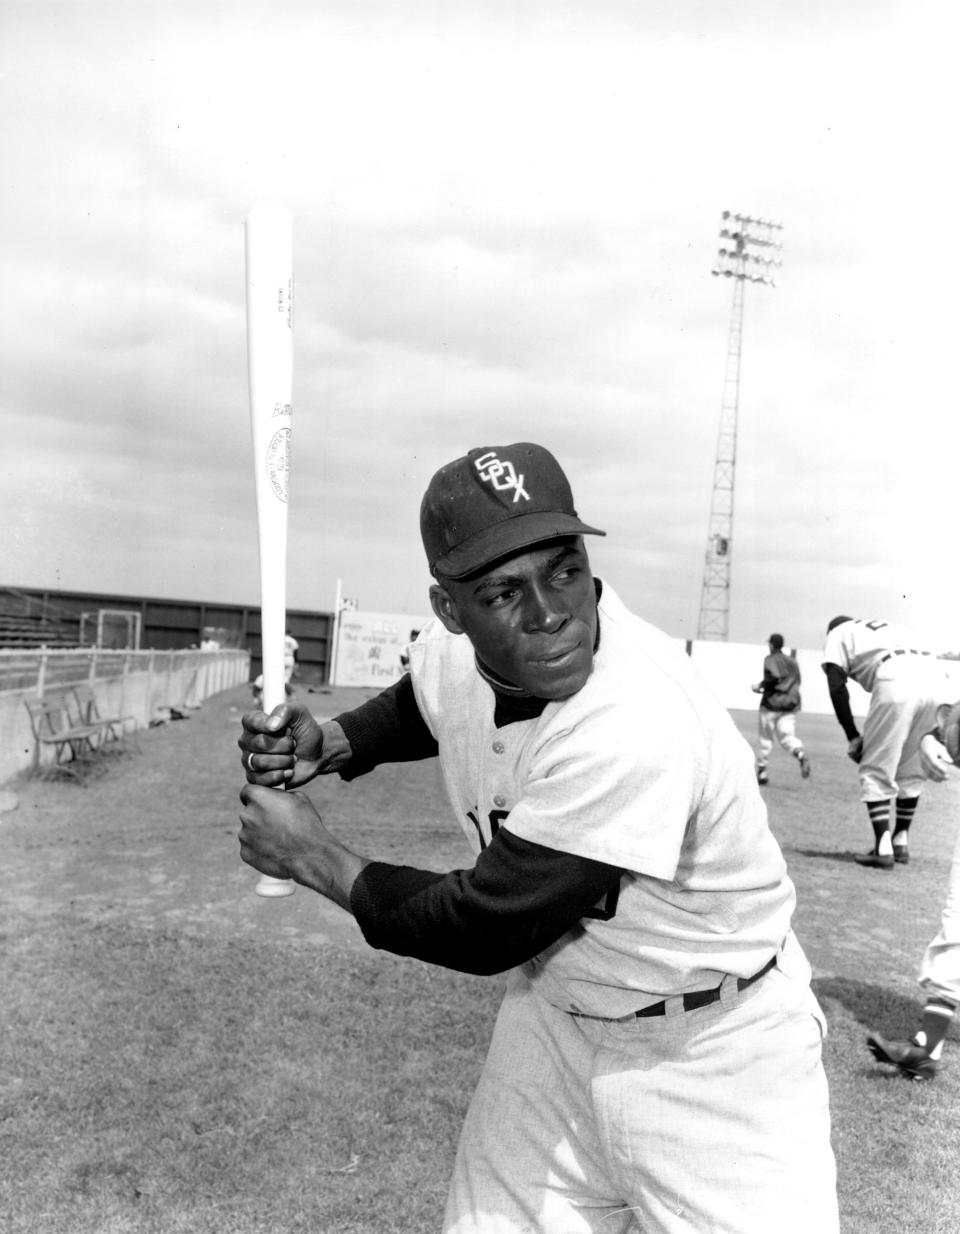 Orestes "Minnie" Miñoso Miñoso batted .299 with 2,110 hits, 195 home runs, 1,093 RBI and 216 stolen bases and had 13 All-Star Game appearances in 20 major-league seasons.